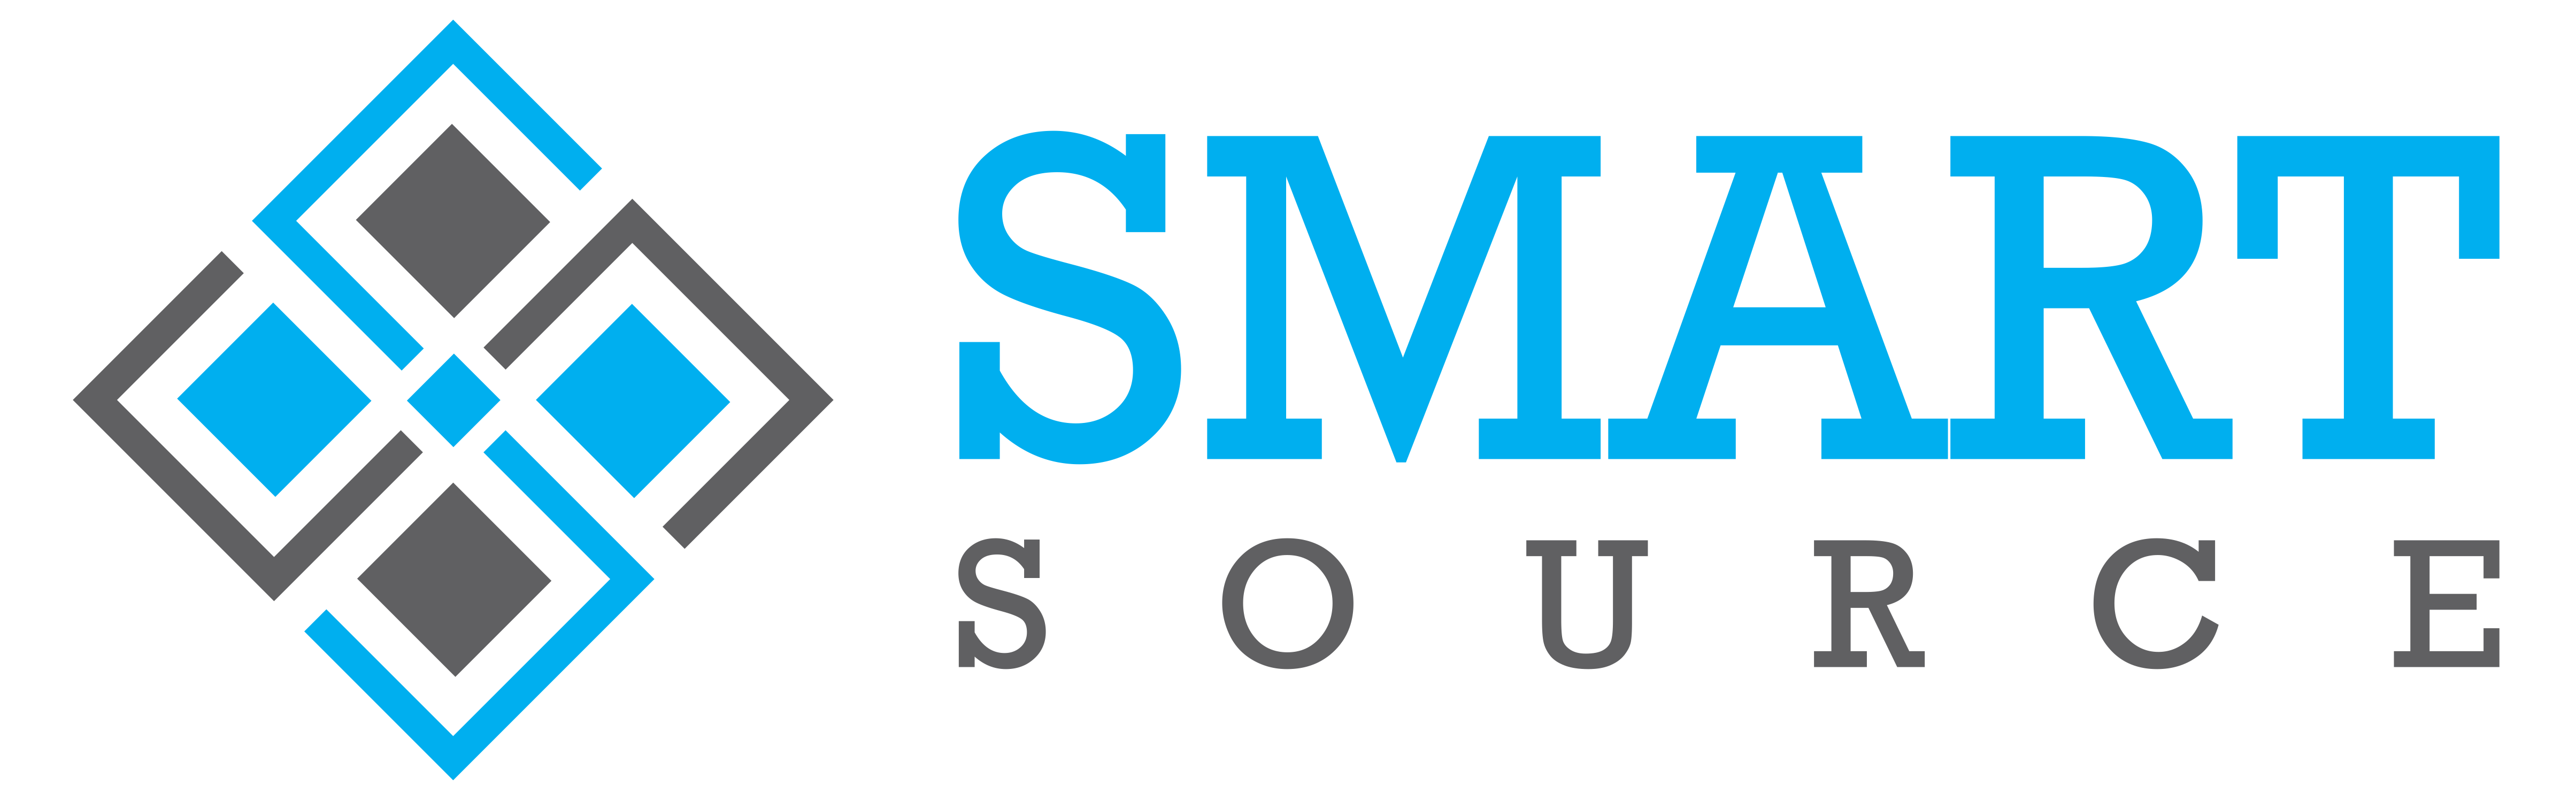 Smart Source - Domains and Hosting Services